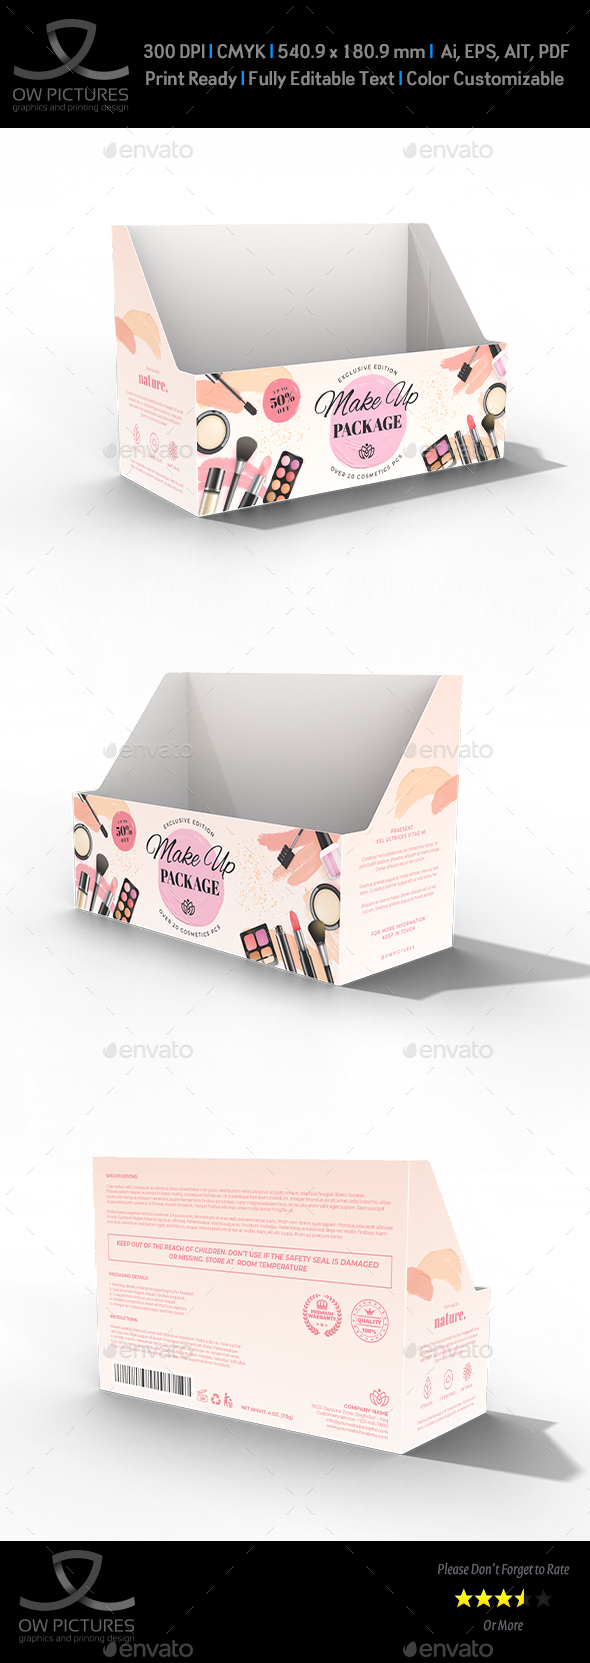 Cosmetics Box Template for Packaging